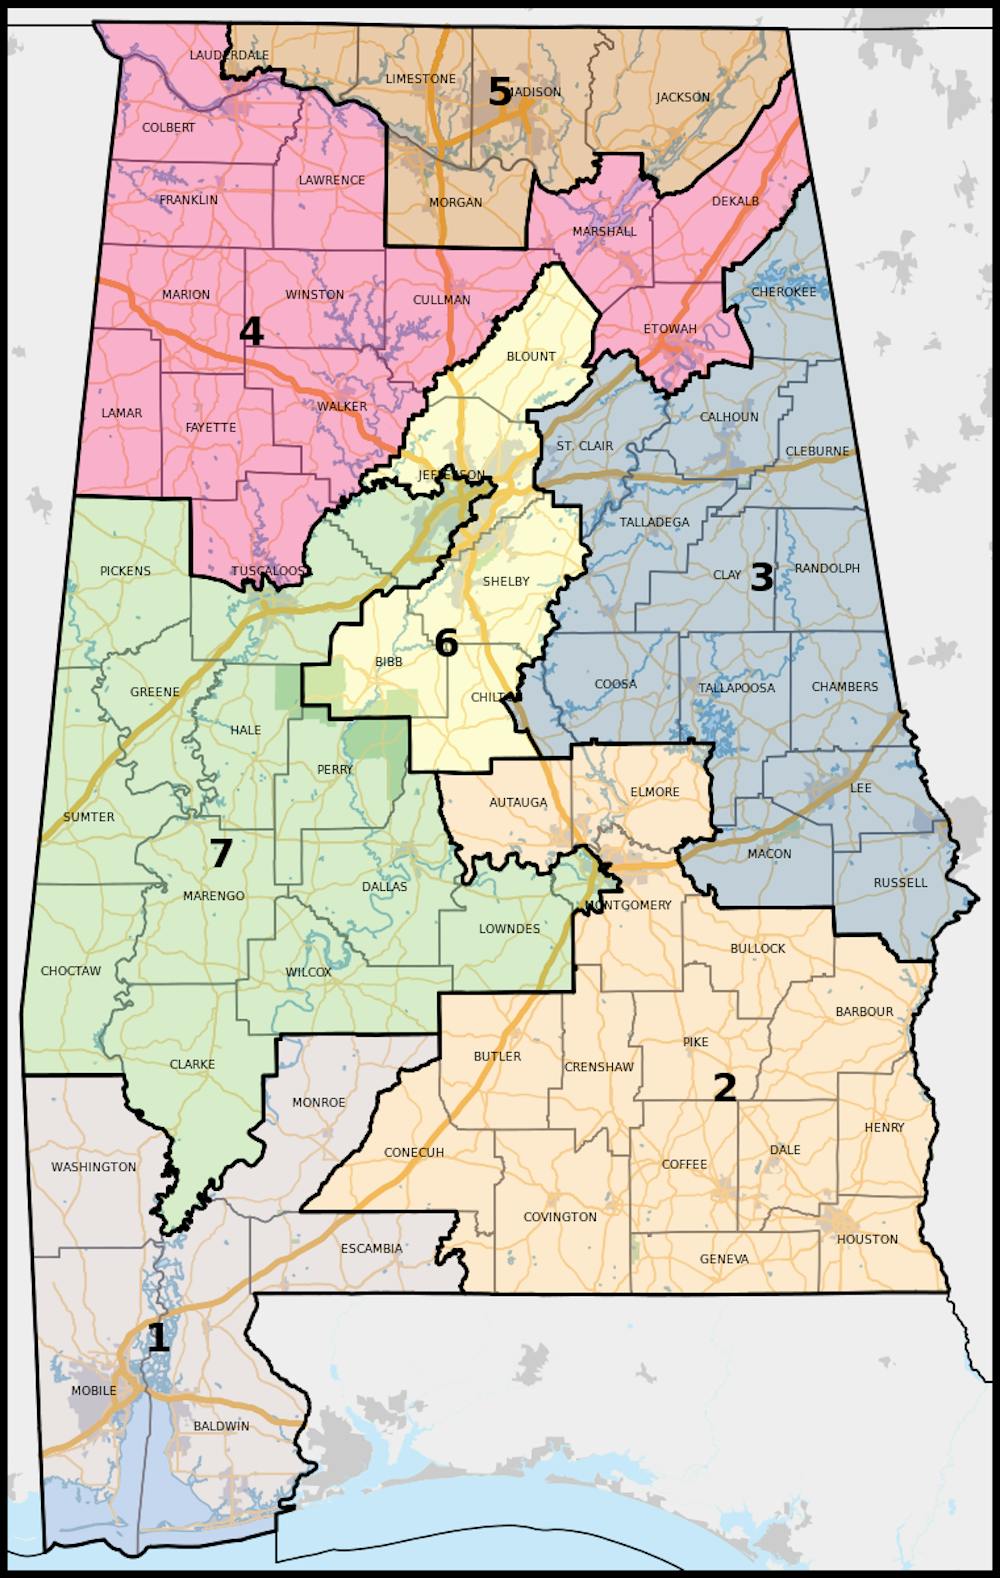 <p><em>Alabama legislatures are appealing to the Supreme Court following an order from federal judges to redraw the state’s congressional district map (Photo courtesy of Wikimedia Commons / “</em><a href="https://commons.wikimedia.org/wiki/File:Alabama_Congressional_Districts,_118th_Congress.svg" target=""><em>Alabama Congressional Districts, 118th Congress</em></a><em>” by Twotwofourtysix. April 12, 2023). </em></p>